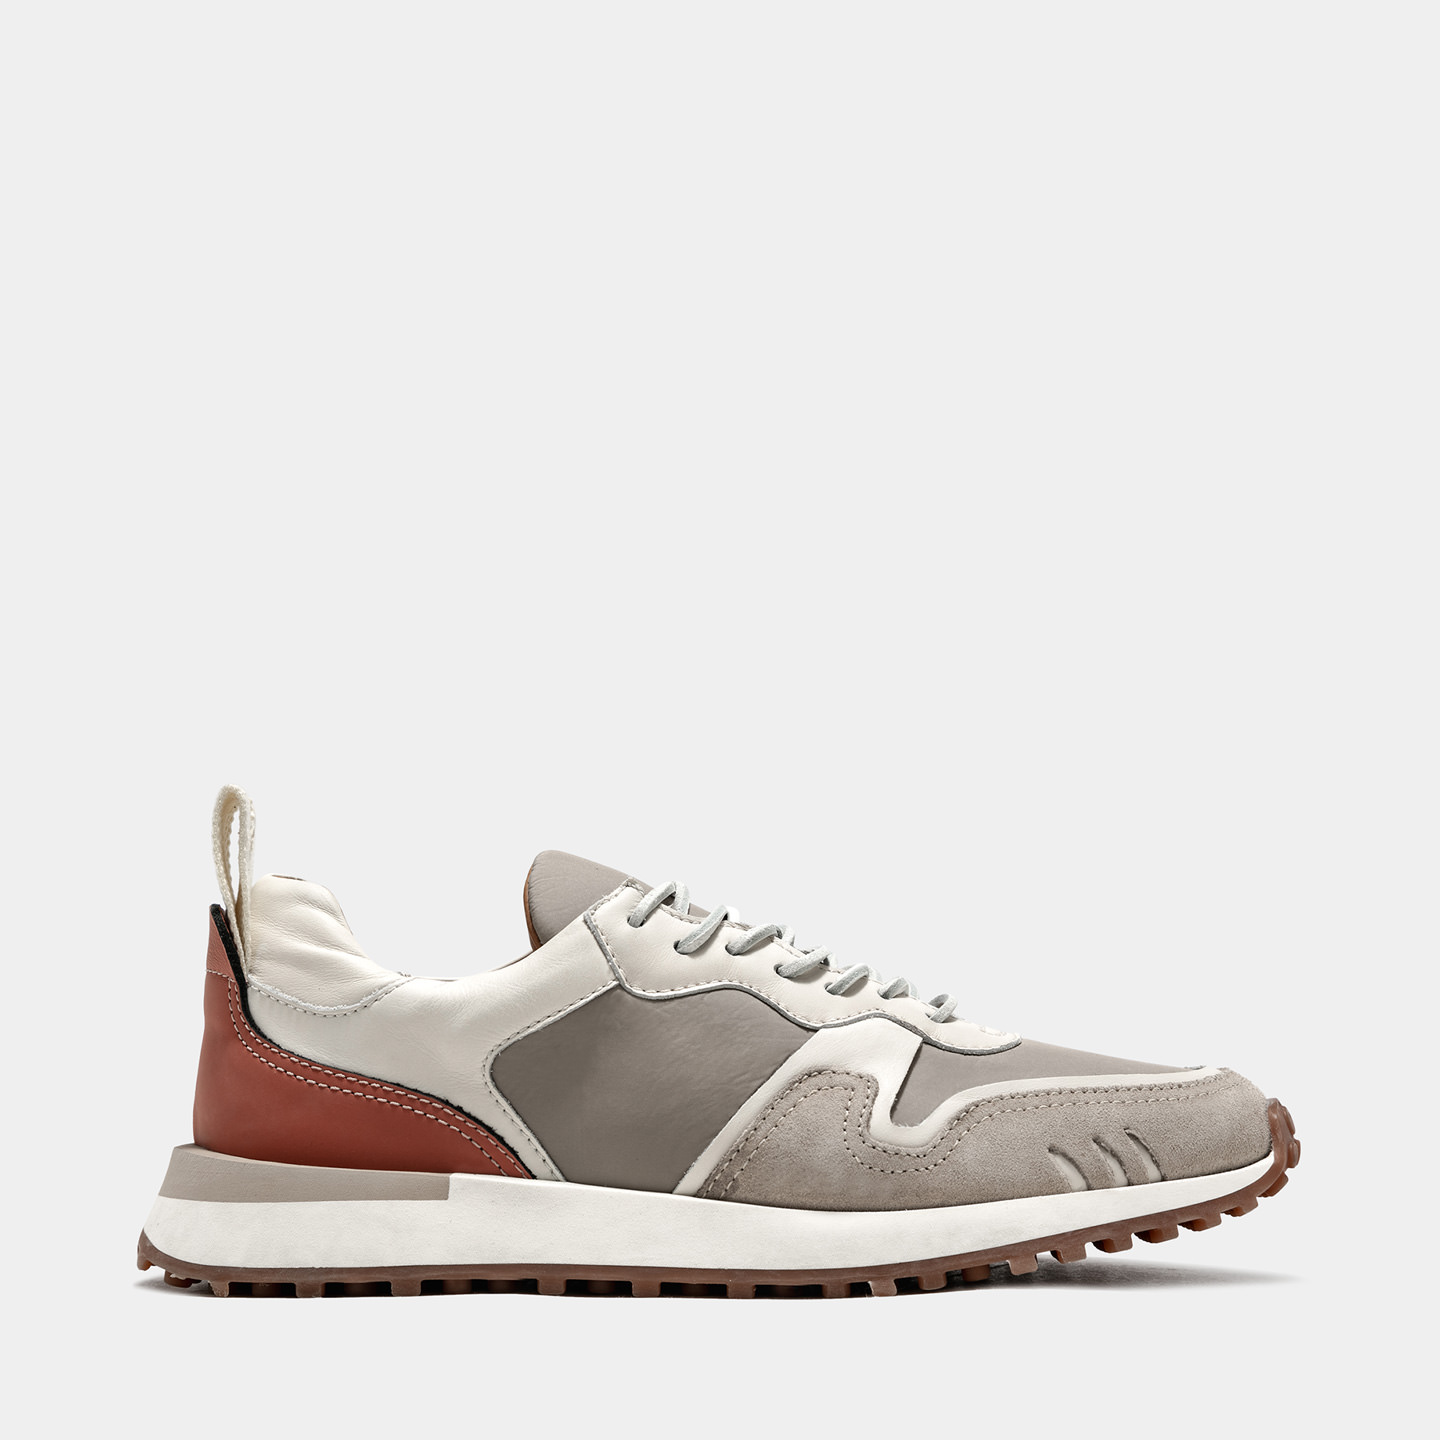 BUTTERO: FUTURA SNEAKERS IN GRAY LEATHER MIX AND NYLON